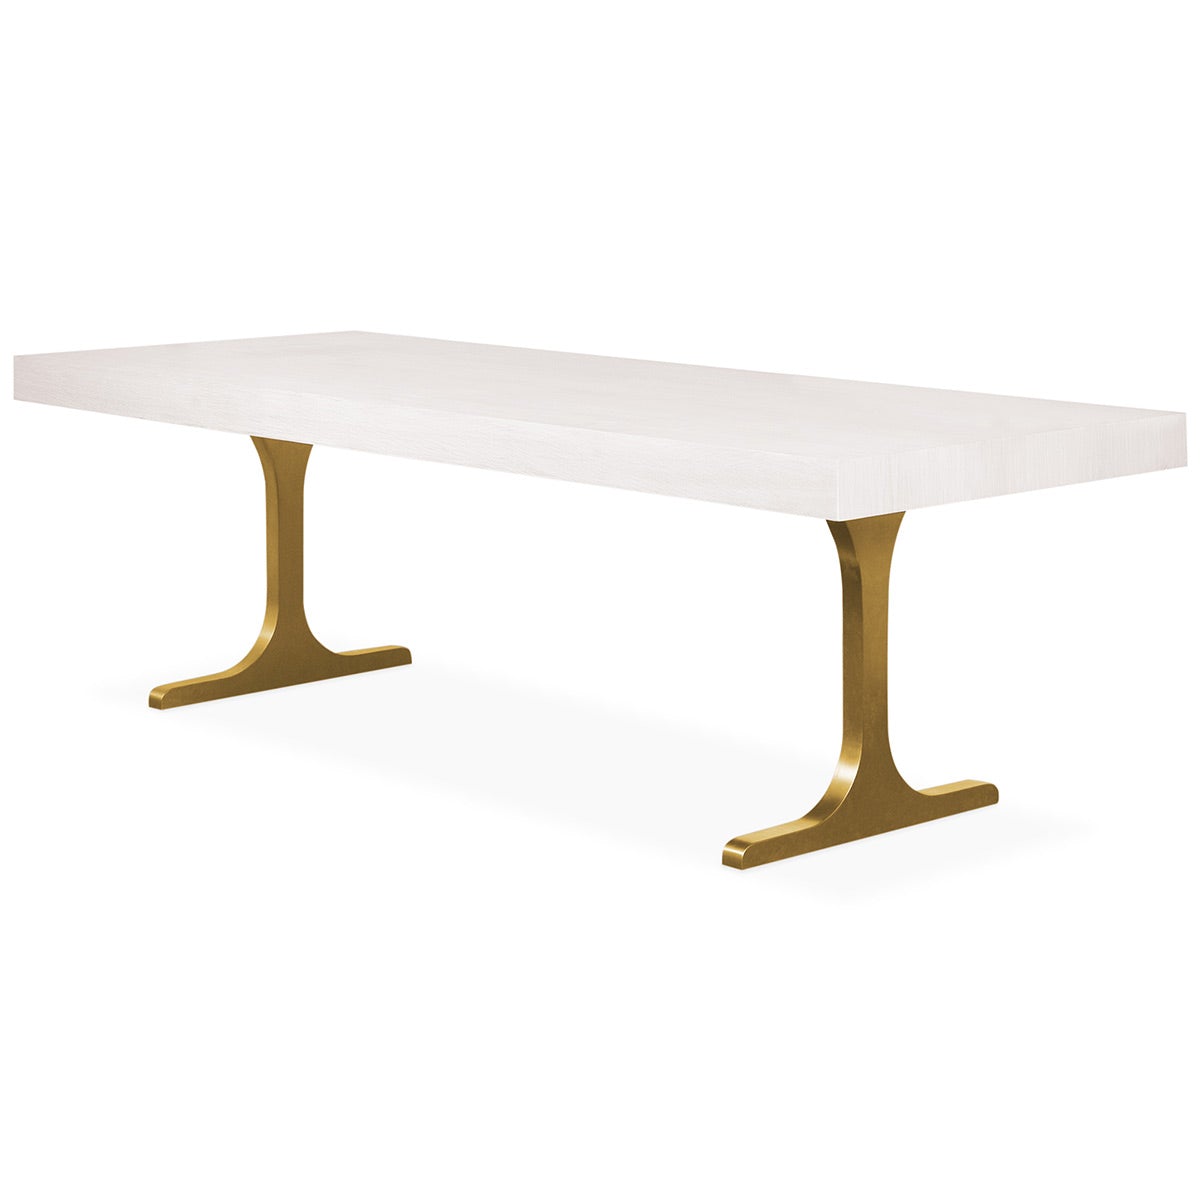 Brixton 3 Dining Table